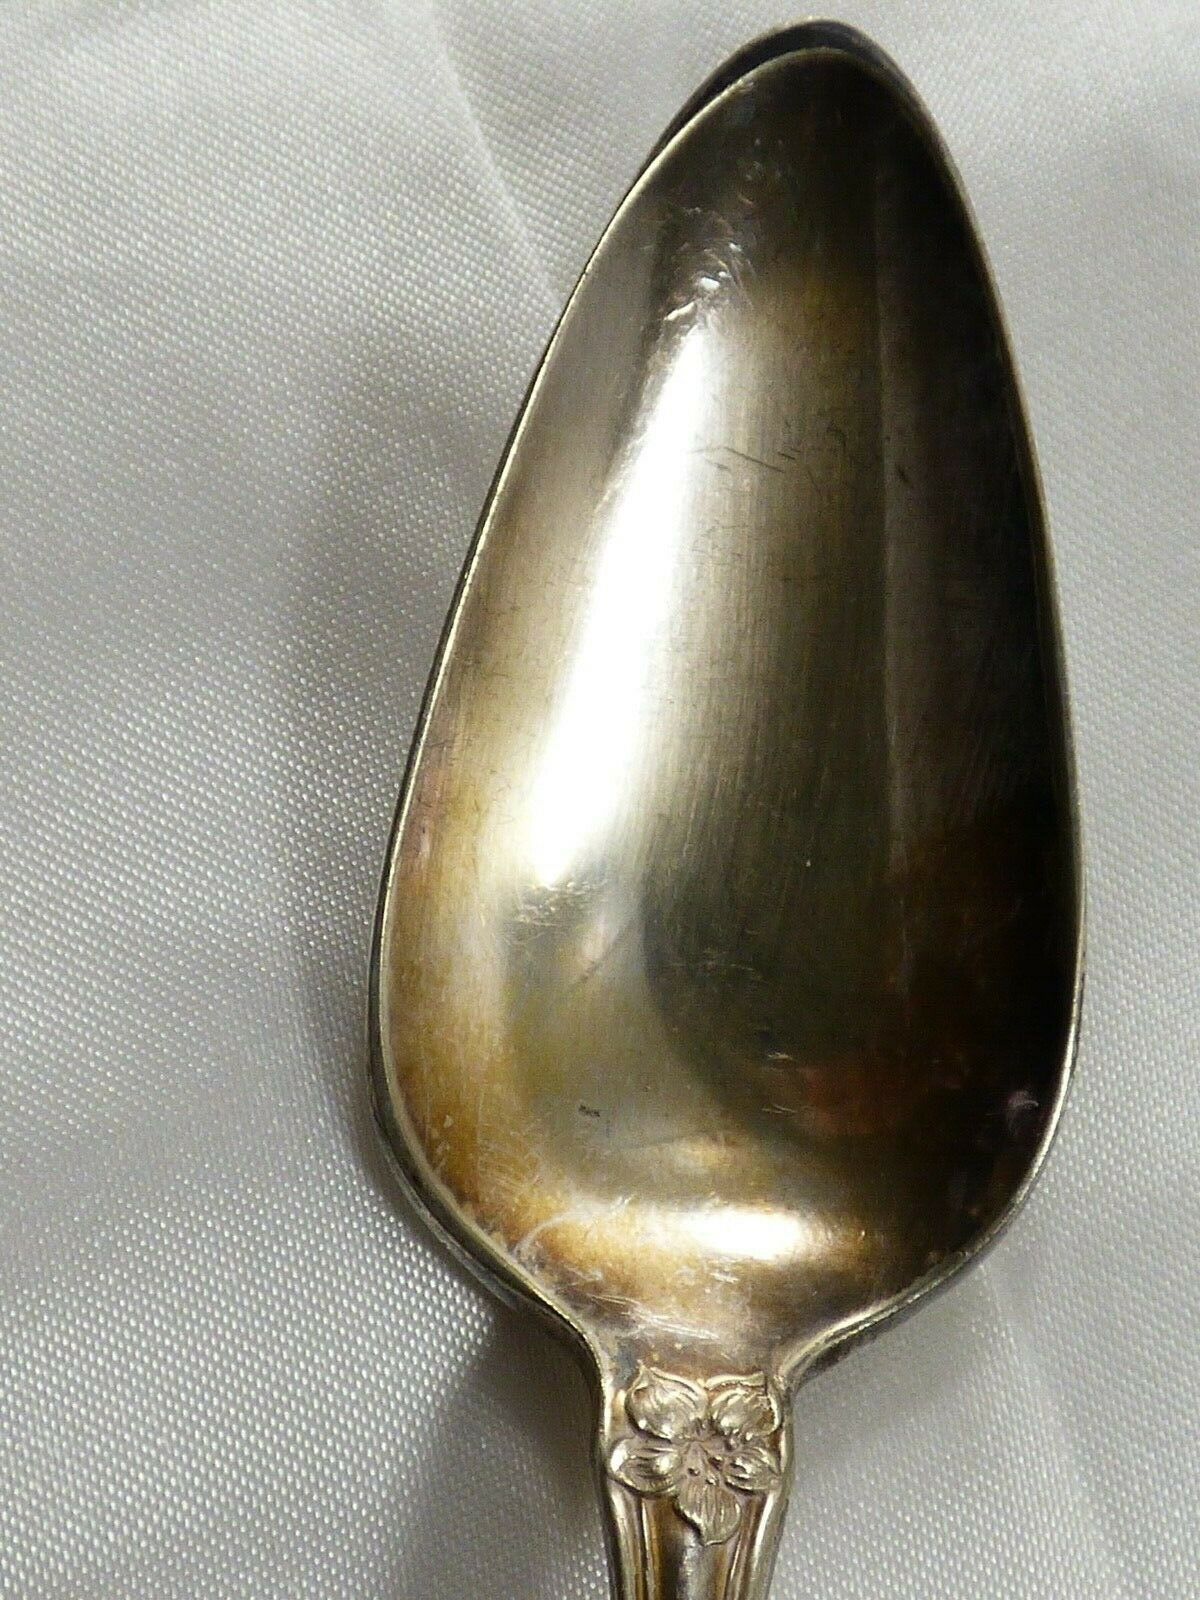 Details about   1910 WM ROGERS & SON ORANGE BLOSSOM SALAD FORK  Silverplate 6 1/8" no mono 